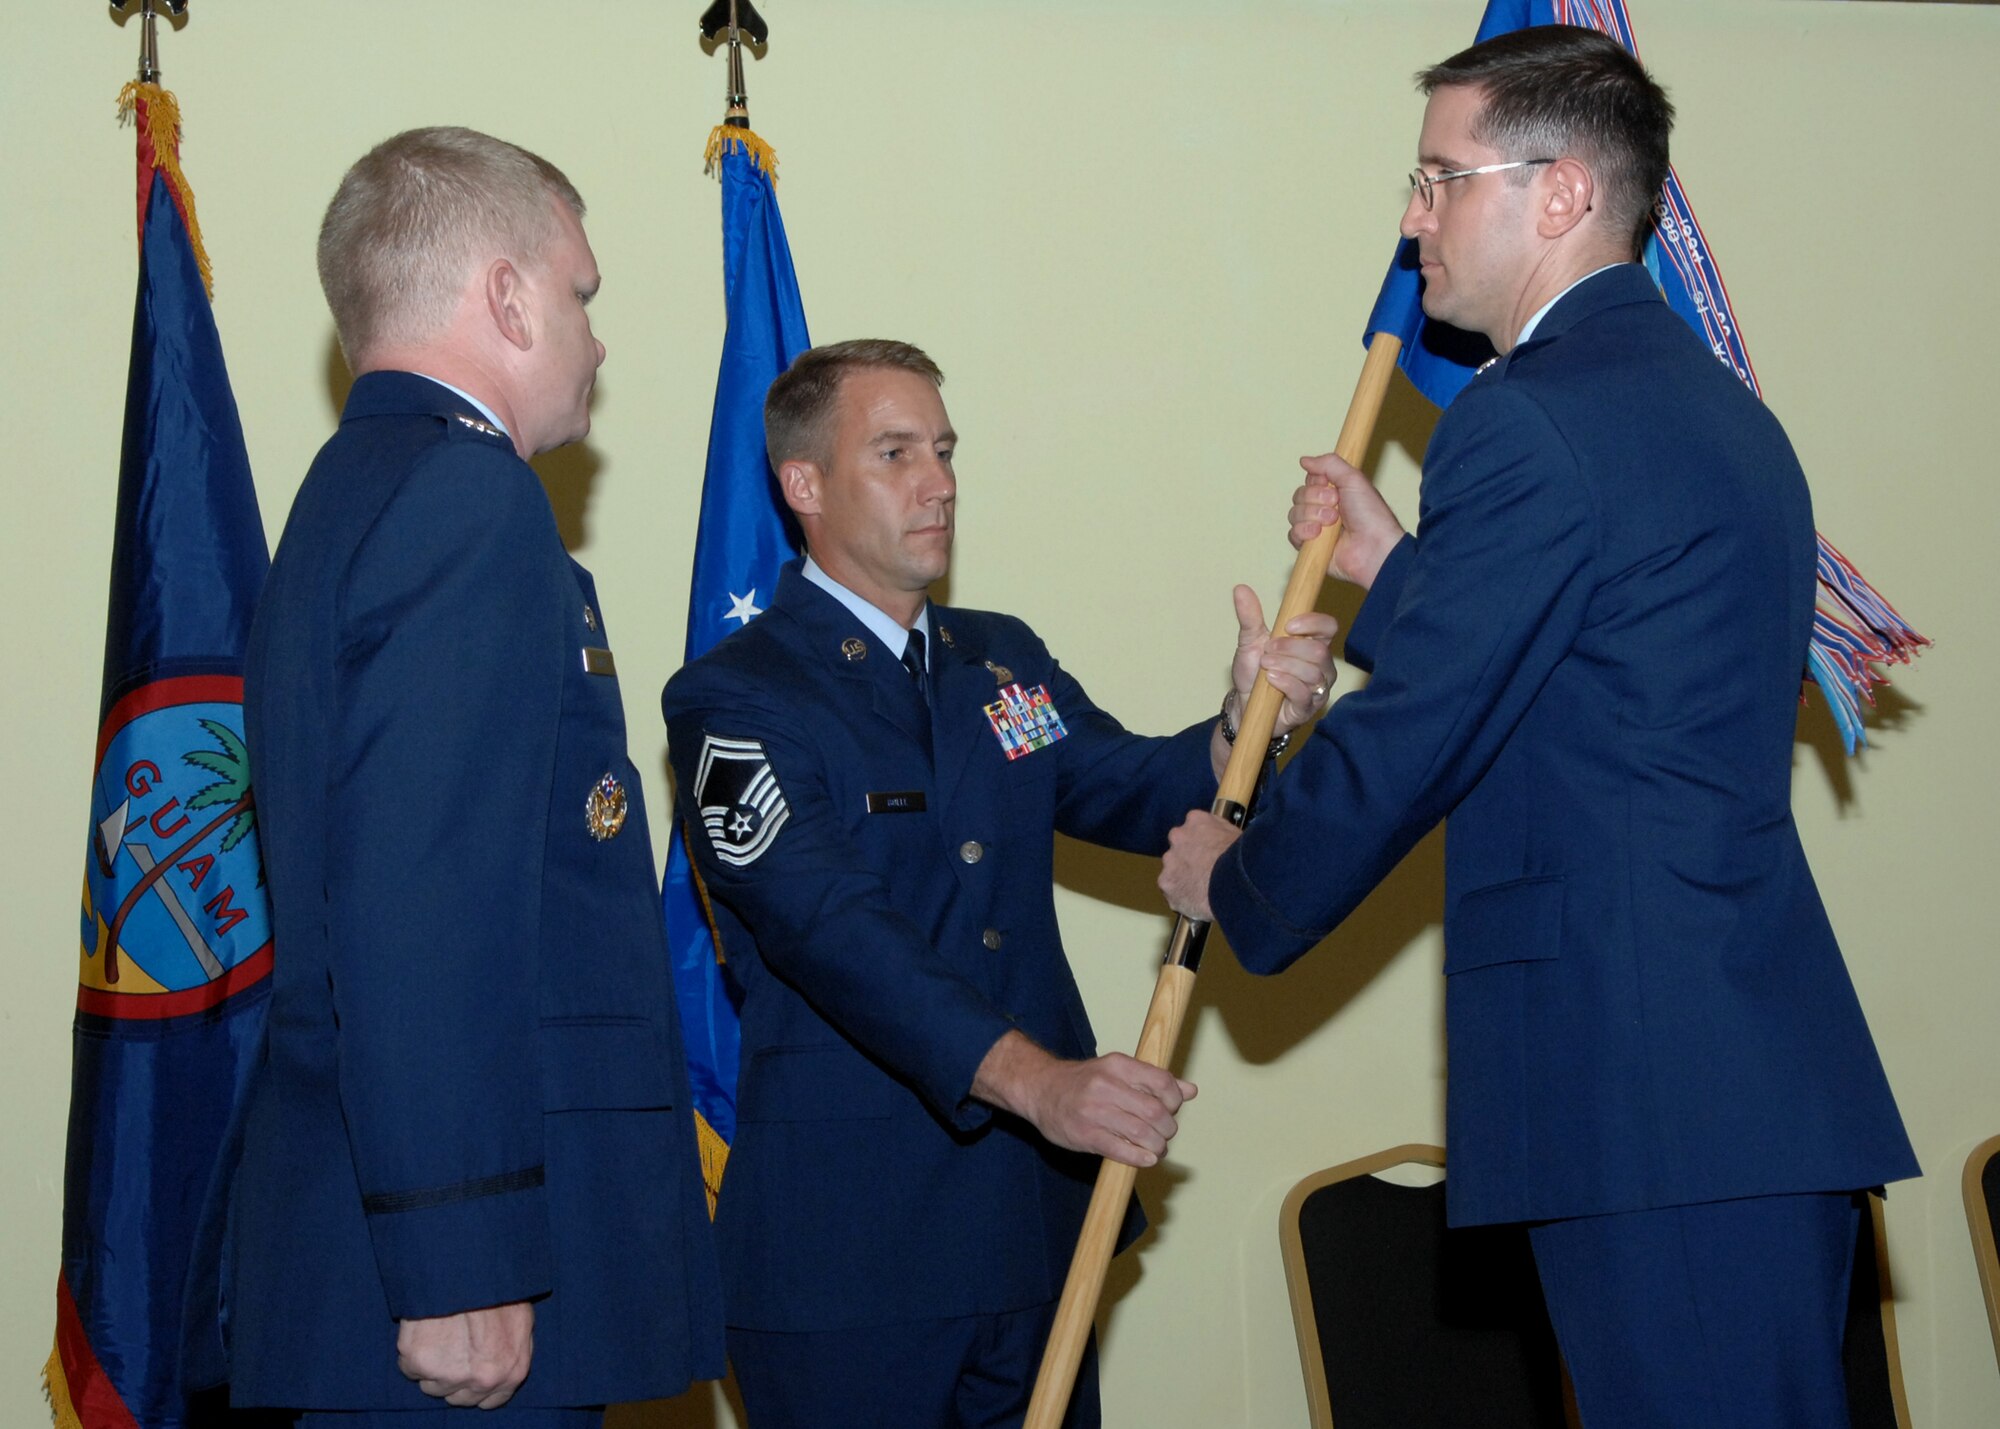 Col. Paul Nosek 36th Mission Support Squadron commander, receives the 36th MSS guidon before passing it to Col. Mark Talley 36th Mission Support Group commander signifying the deactivation of the squadron July 1 here. The 36th Services Squadron and the 36th MSS were both deactivated and merged together creating the 36th Force Support Squadron.(U.S. Air Force by Airman 1st Class Nichelle Griffiths) 